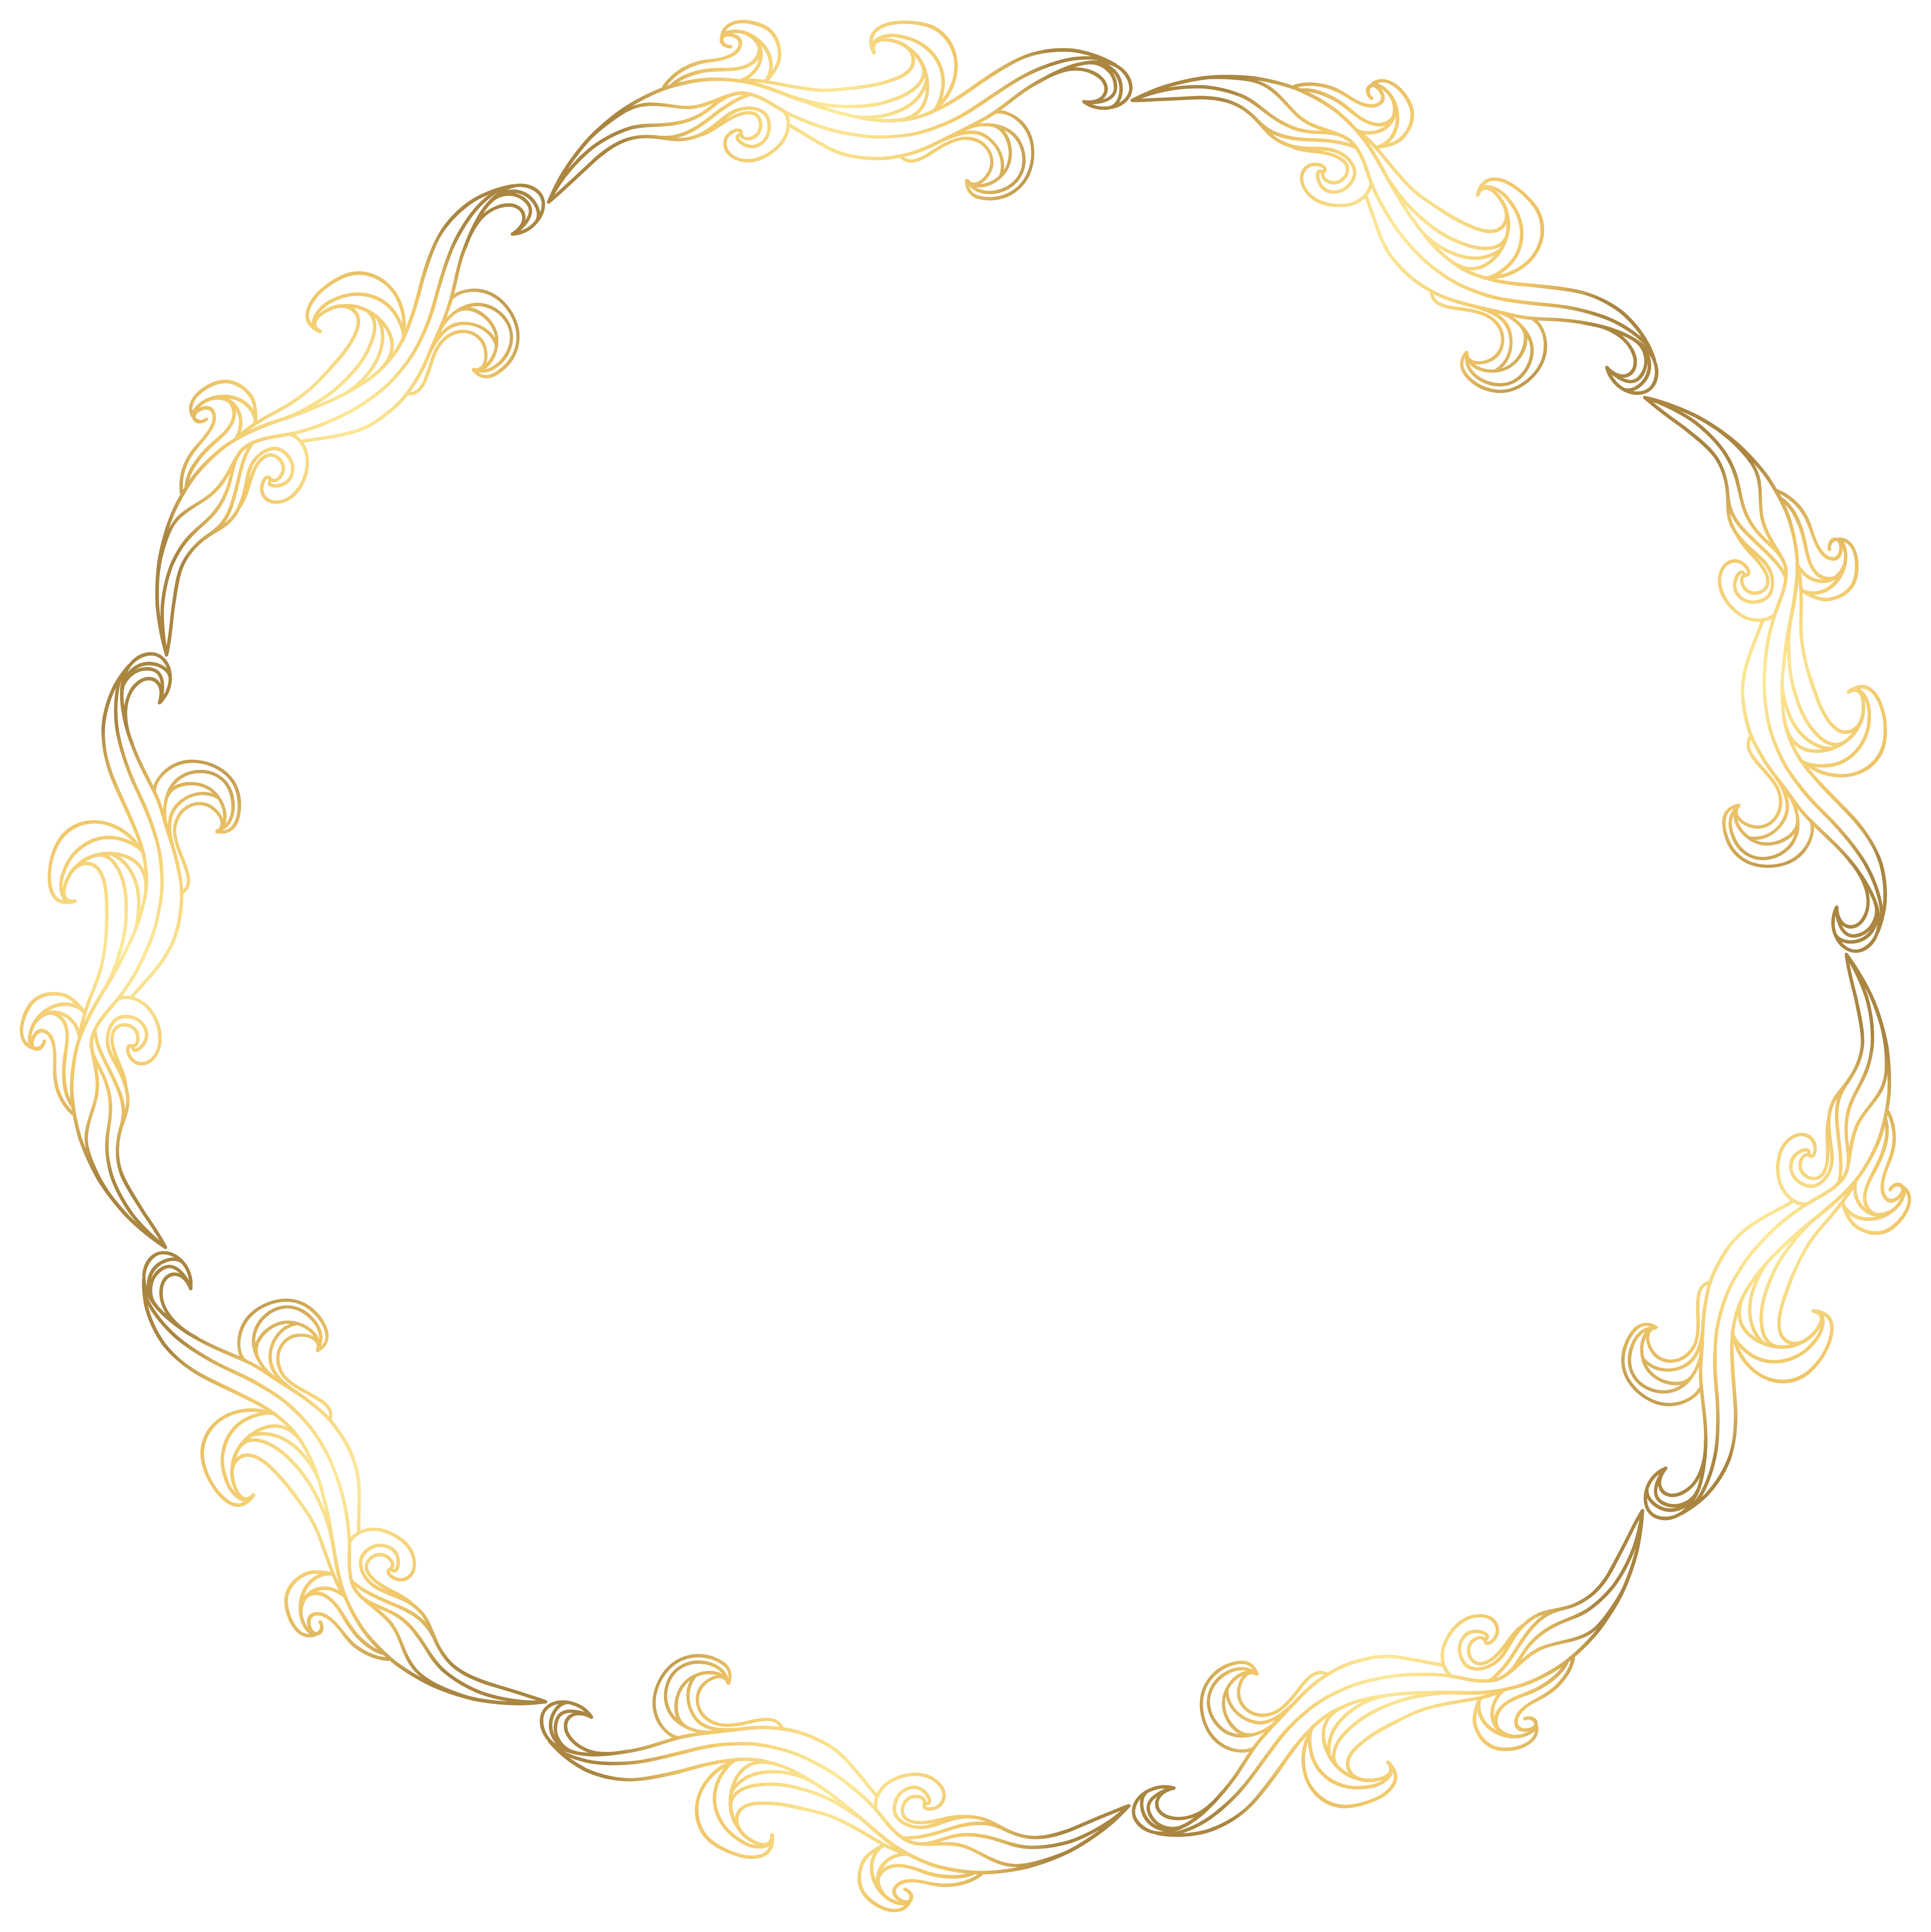 Floral Gold Round Border Png Transparent Clip Art Image Gallery Yopriceville High Quality Images And Transparent Png Free Clipart Flower line on transparent background | border, horizontal, vertical. gallery yopriceville